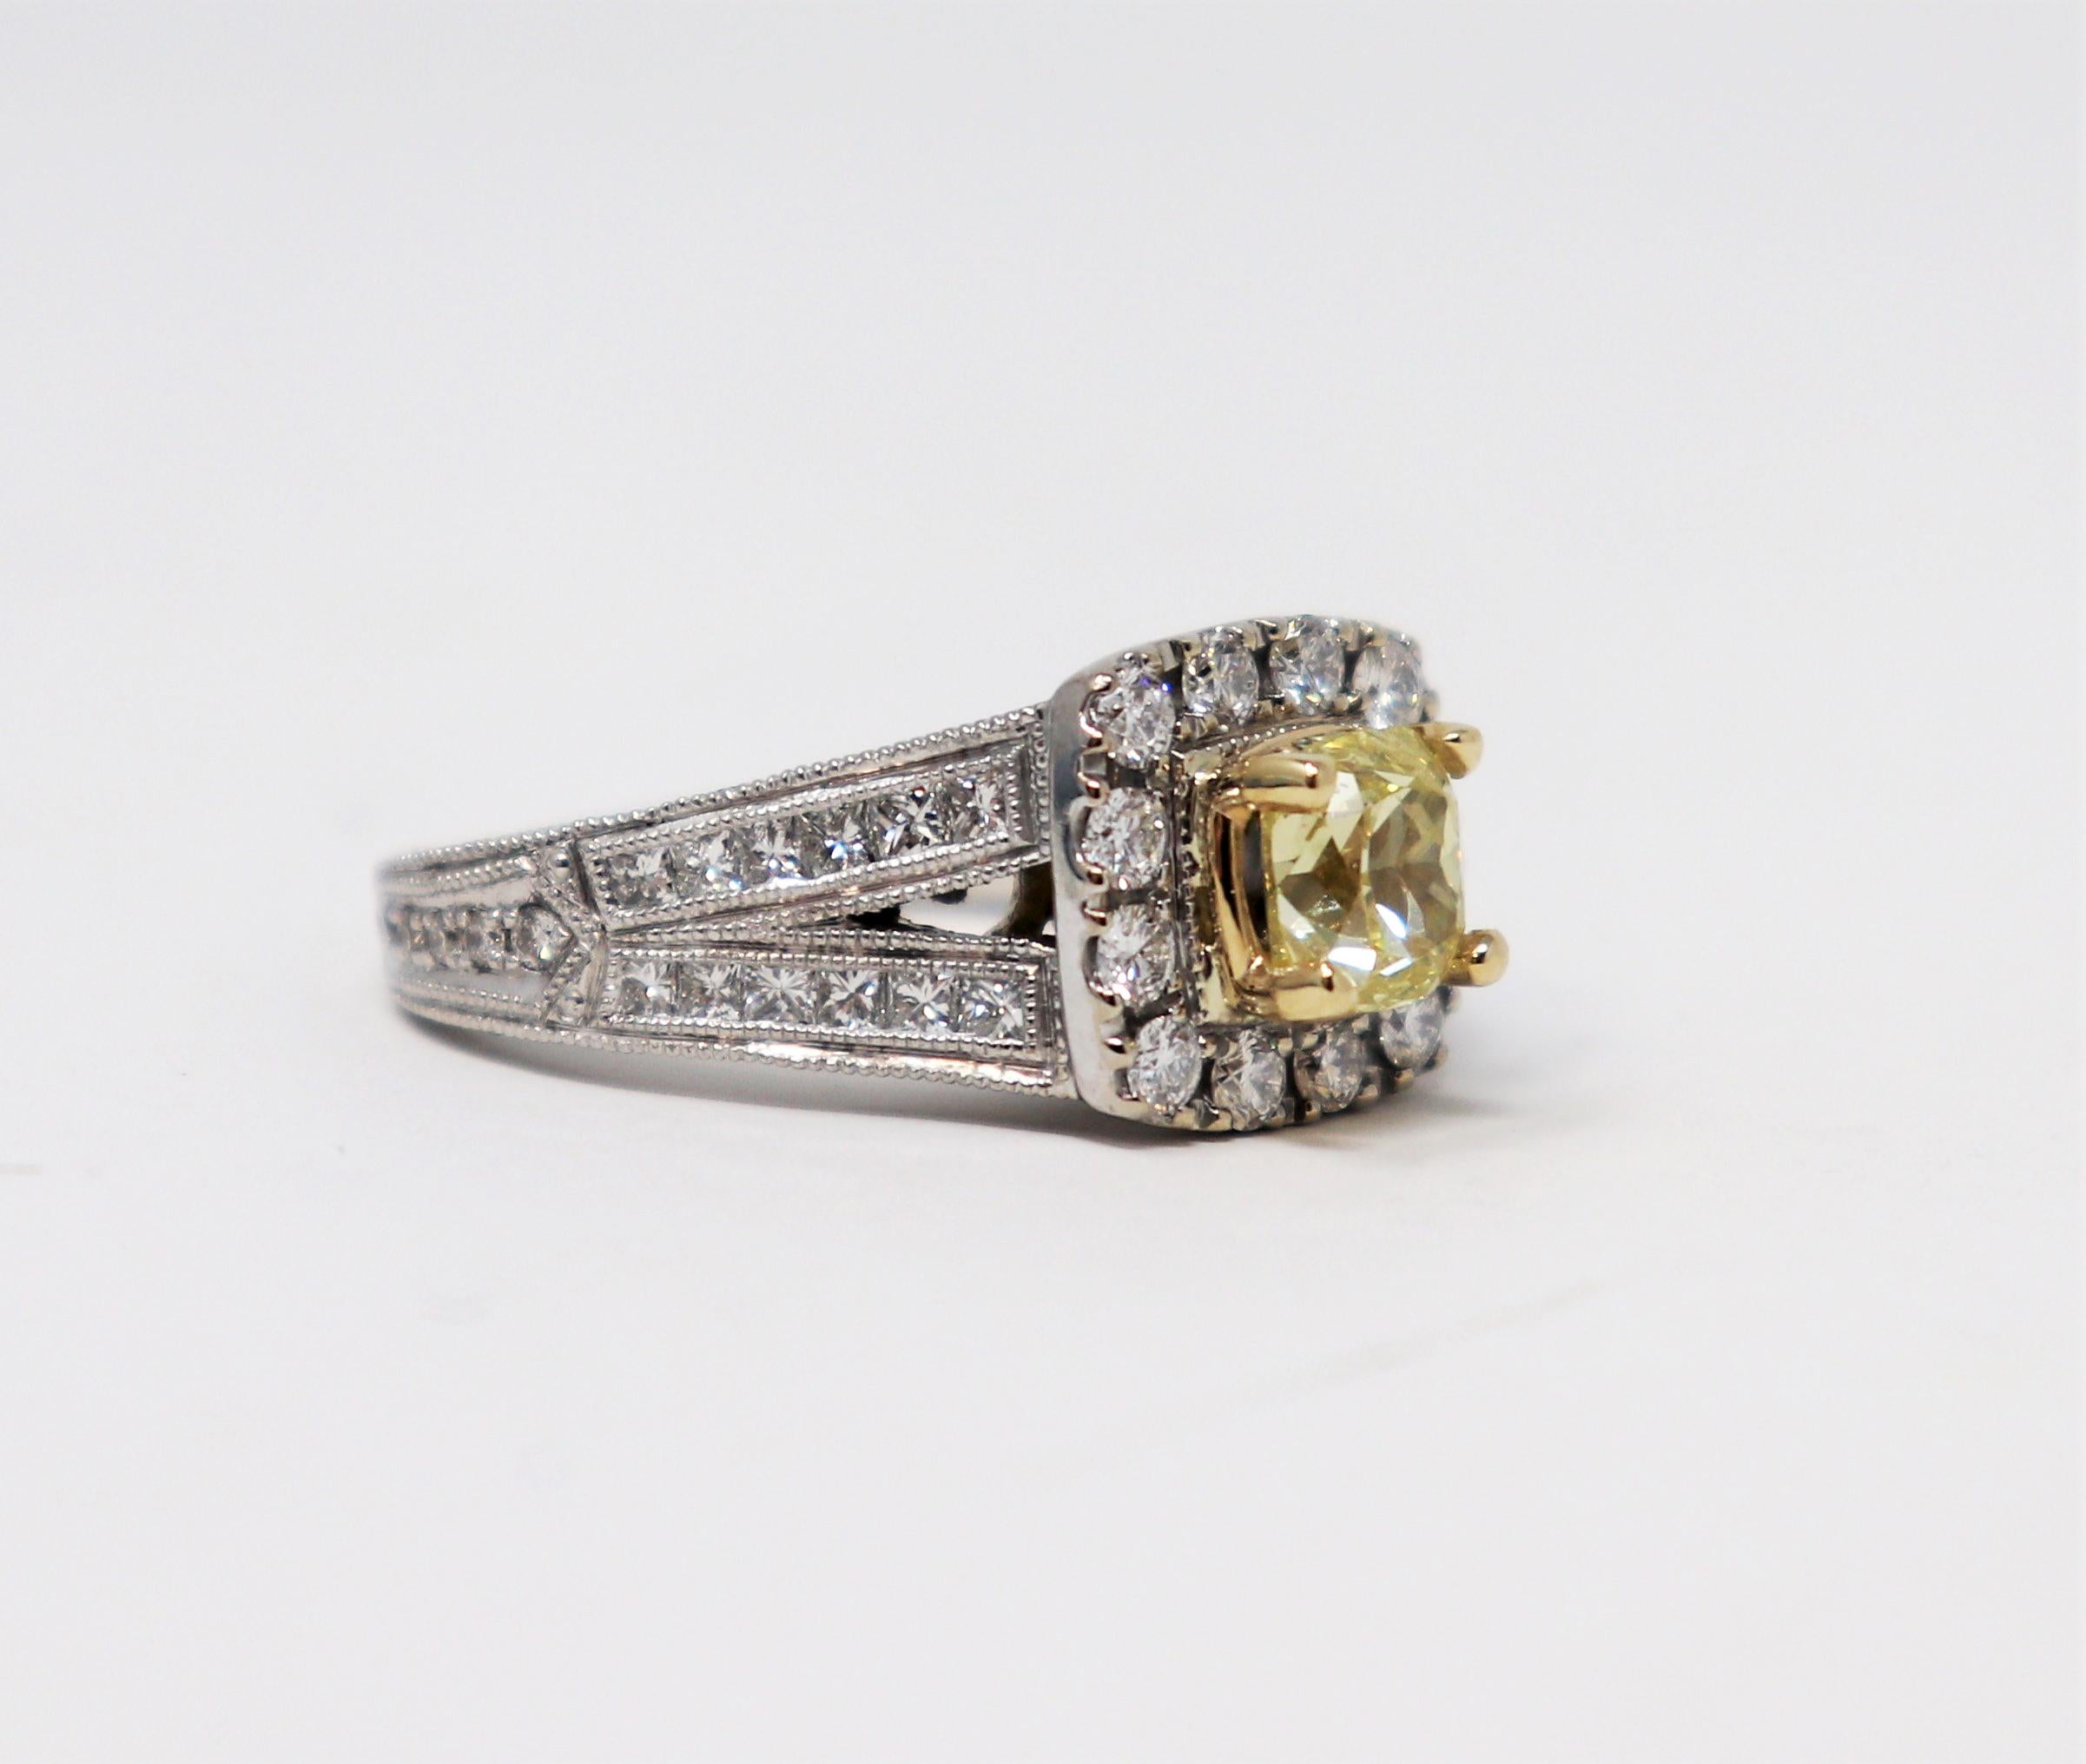 Ring size: 4.75

Renowned ring designer, Neil Lane wows us once again with this stunning engagement ring. This absolutely exquisite halo split shank diamond ring combines white and yellow diamonds in a unique design to showcase the color and